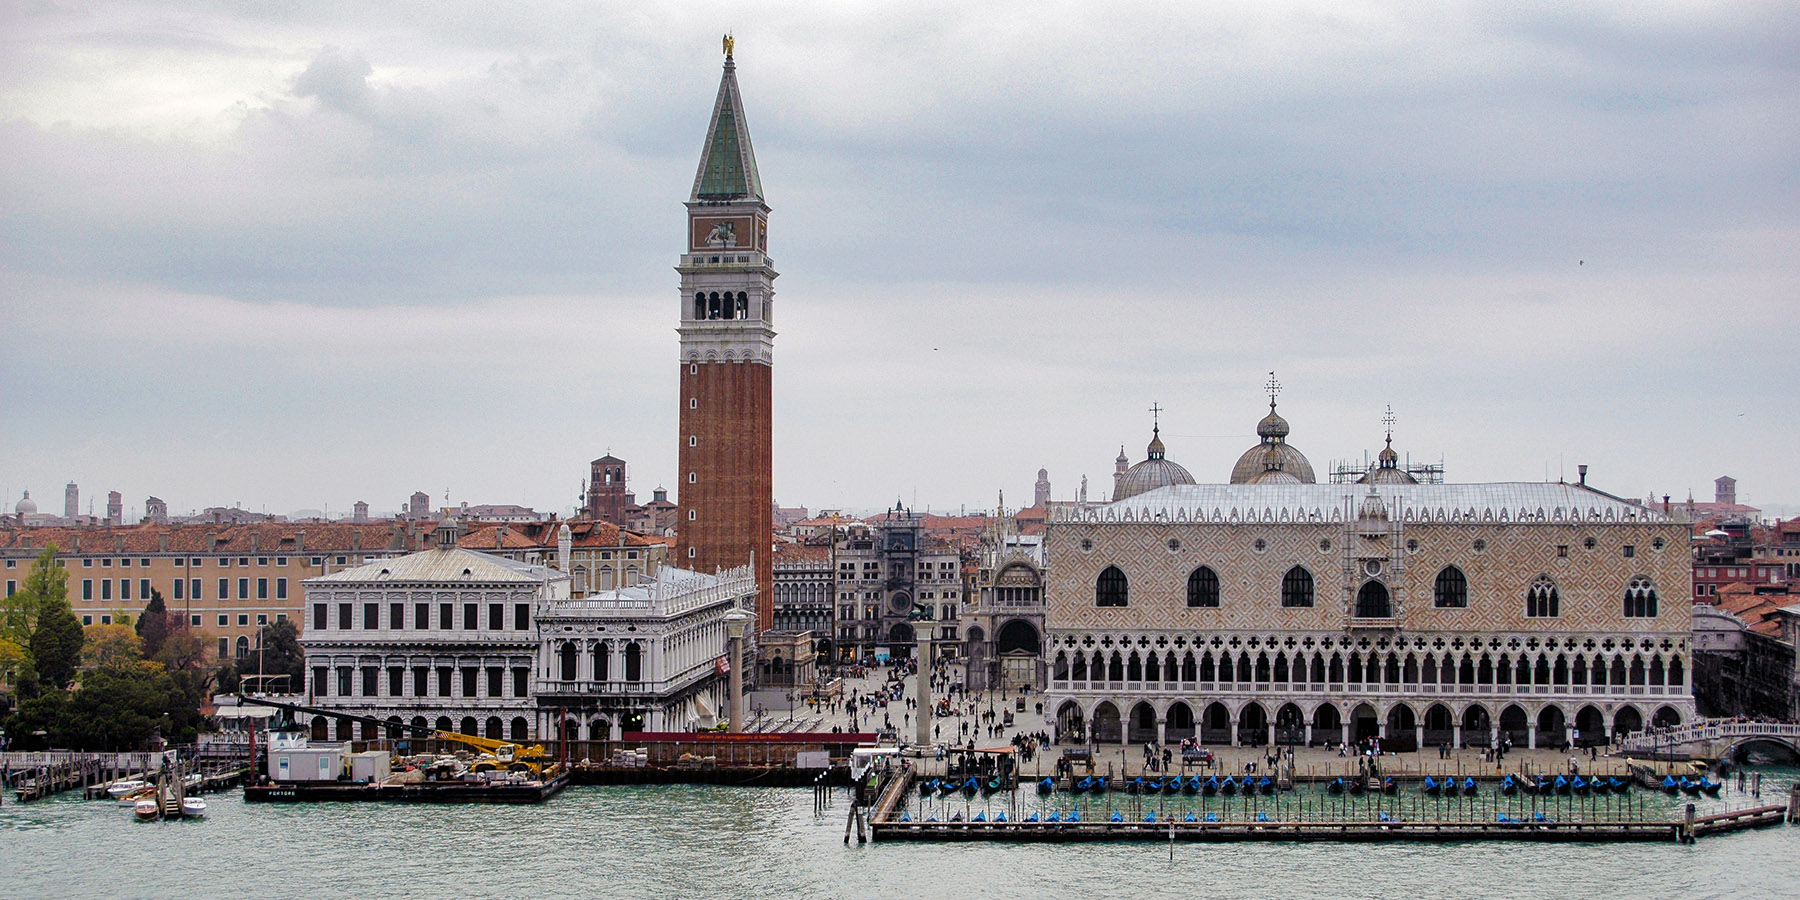 'Piazza San Marco', Saint Mark's Campanile, and the Doge's Palace